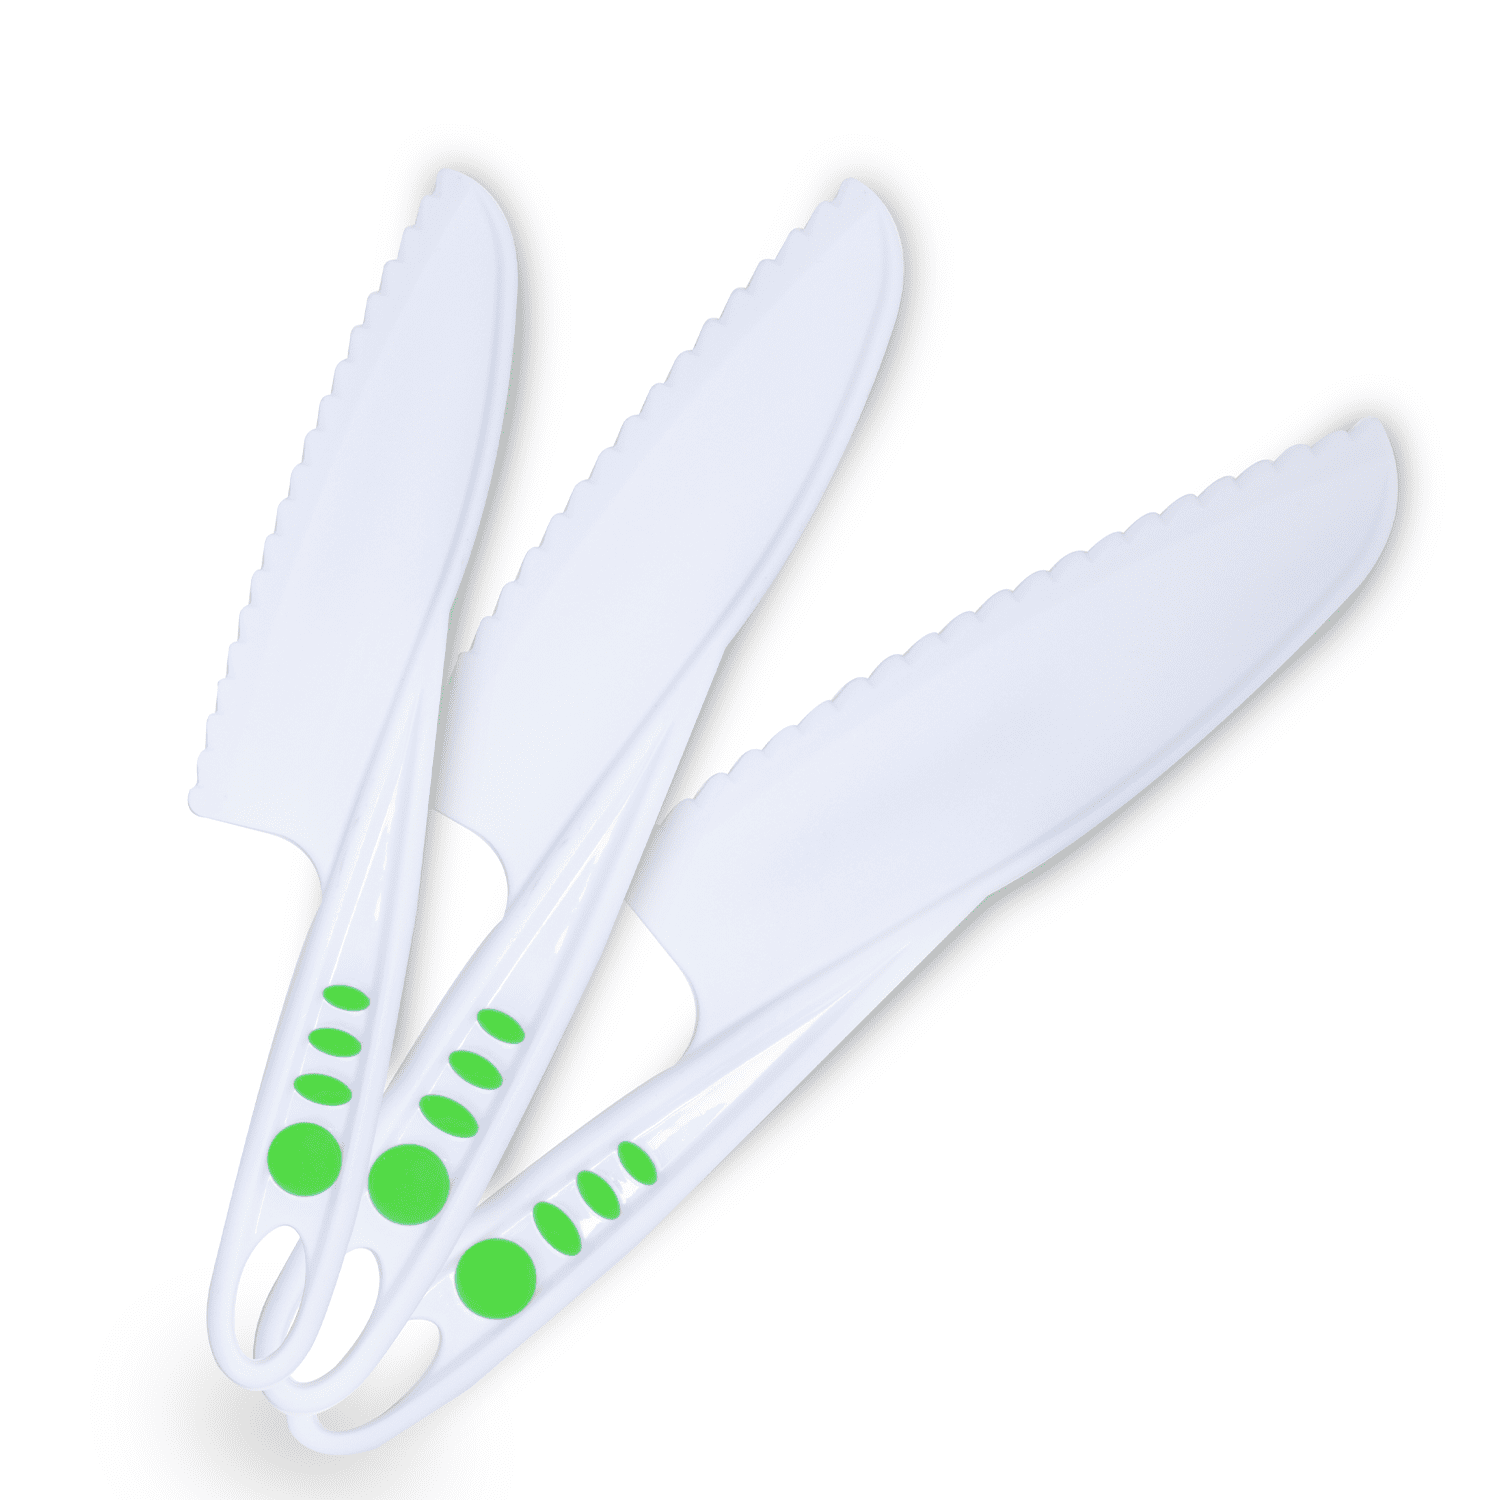 Playful Chef: 3 Safety Knives Set For Kids – Real Cooking Supplies